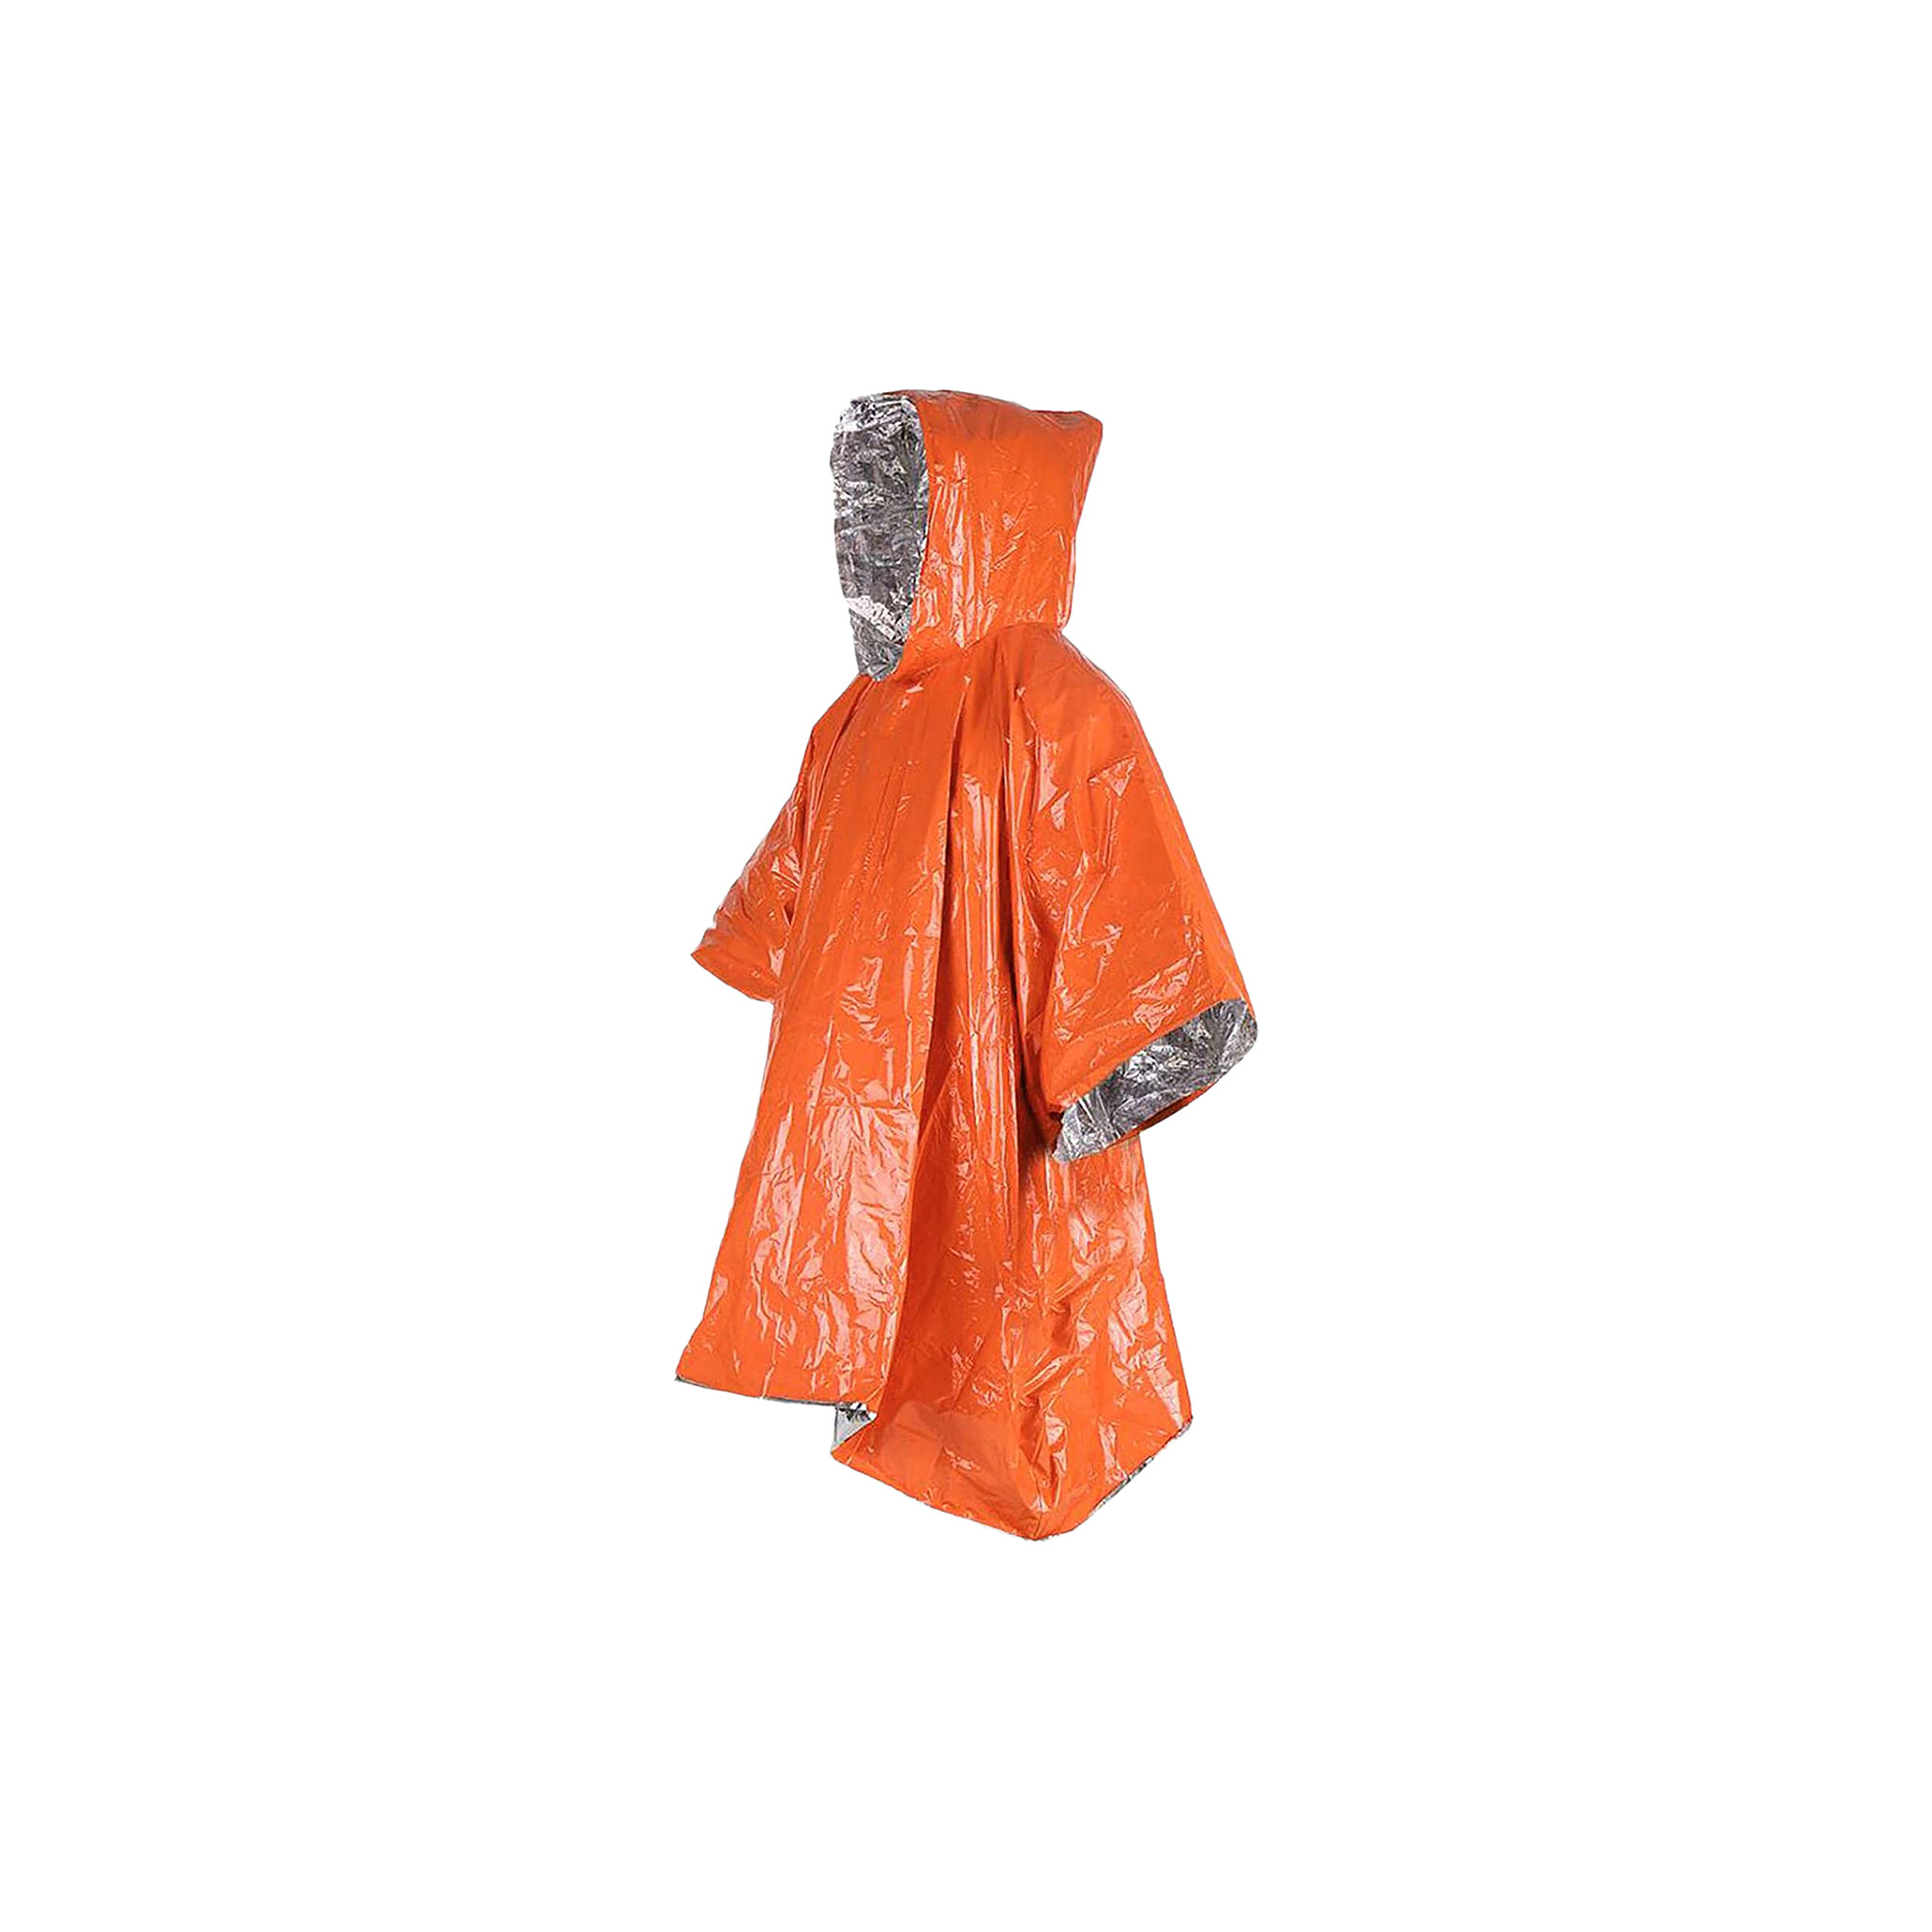 Reusable Survival and Emergency Poncho 3156830080129